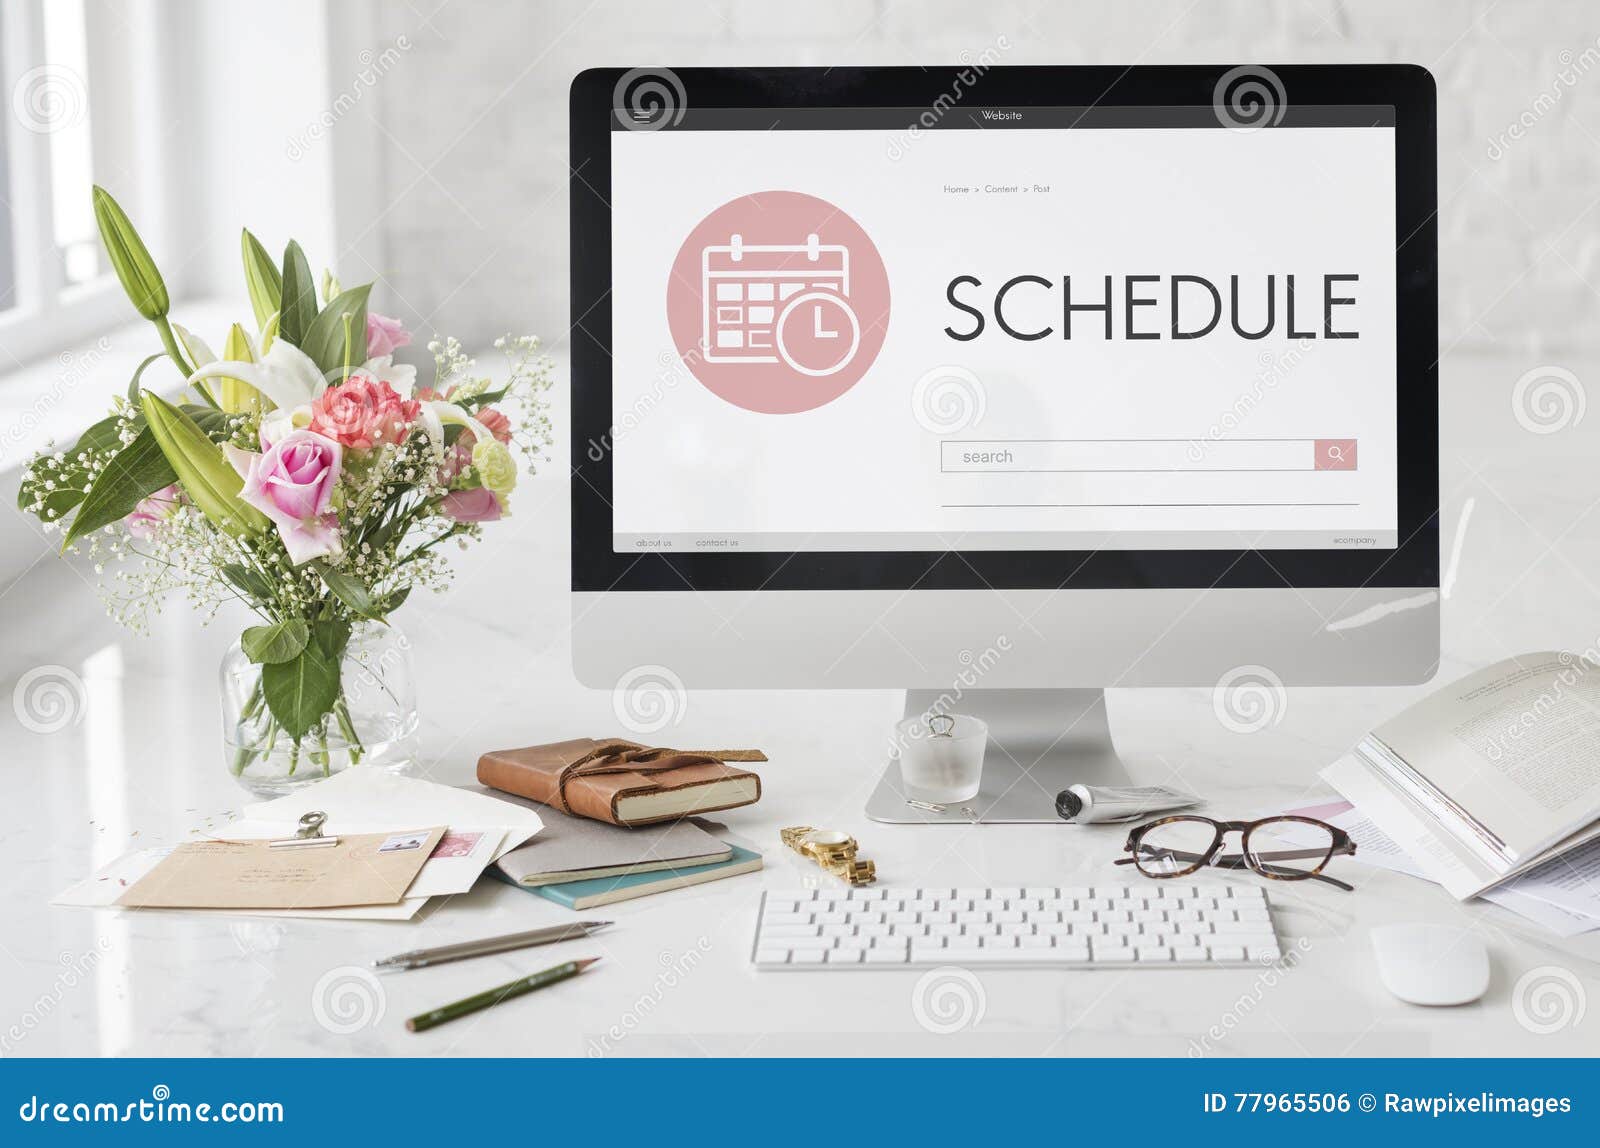 schedule appointment meeting agenda planner concept